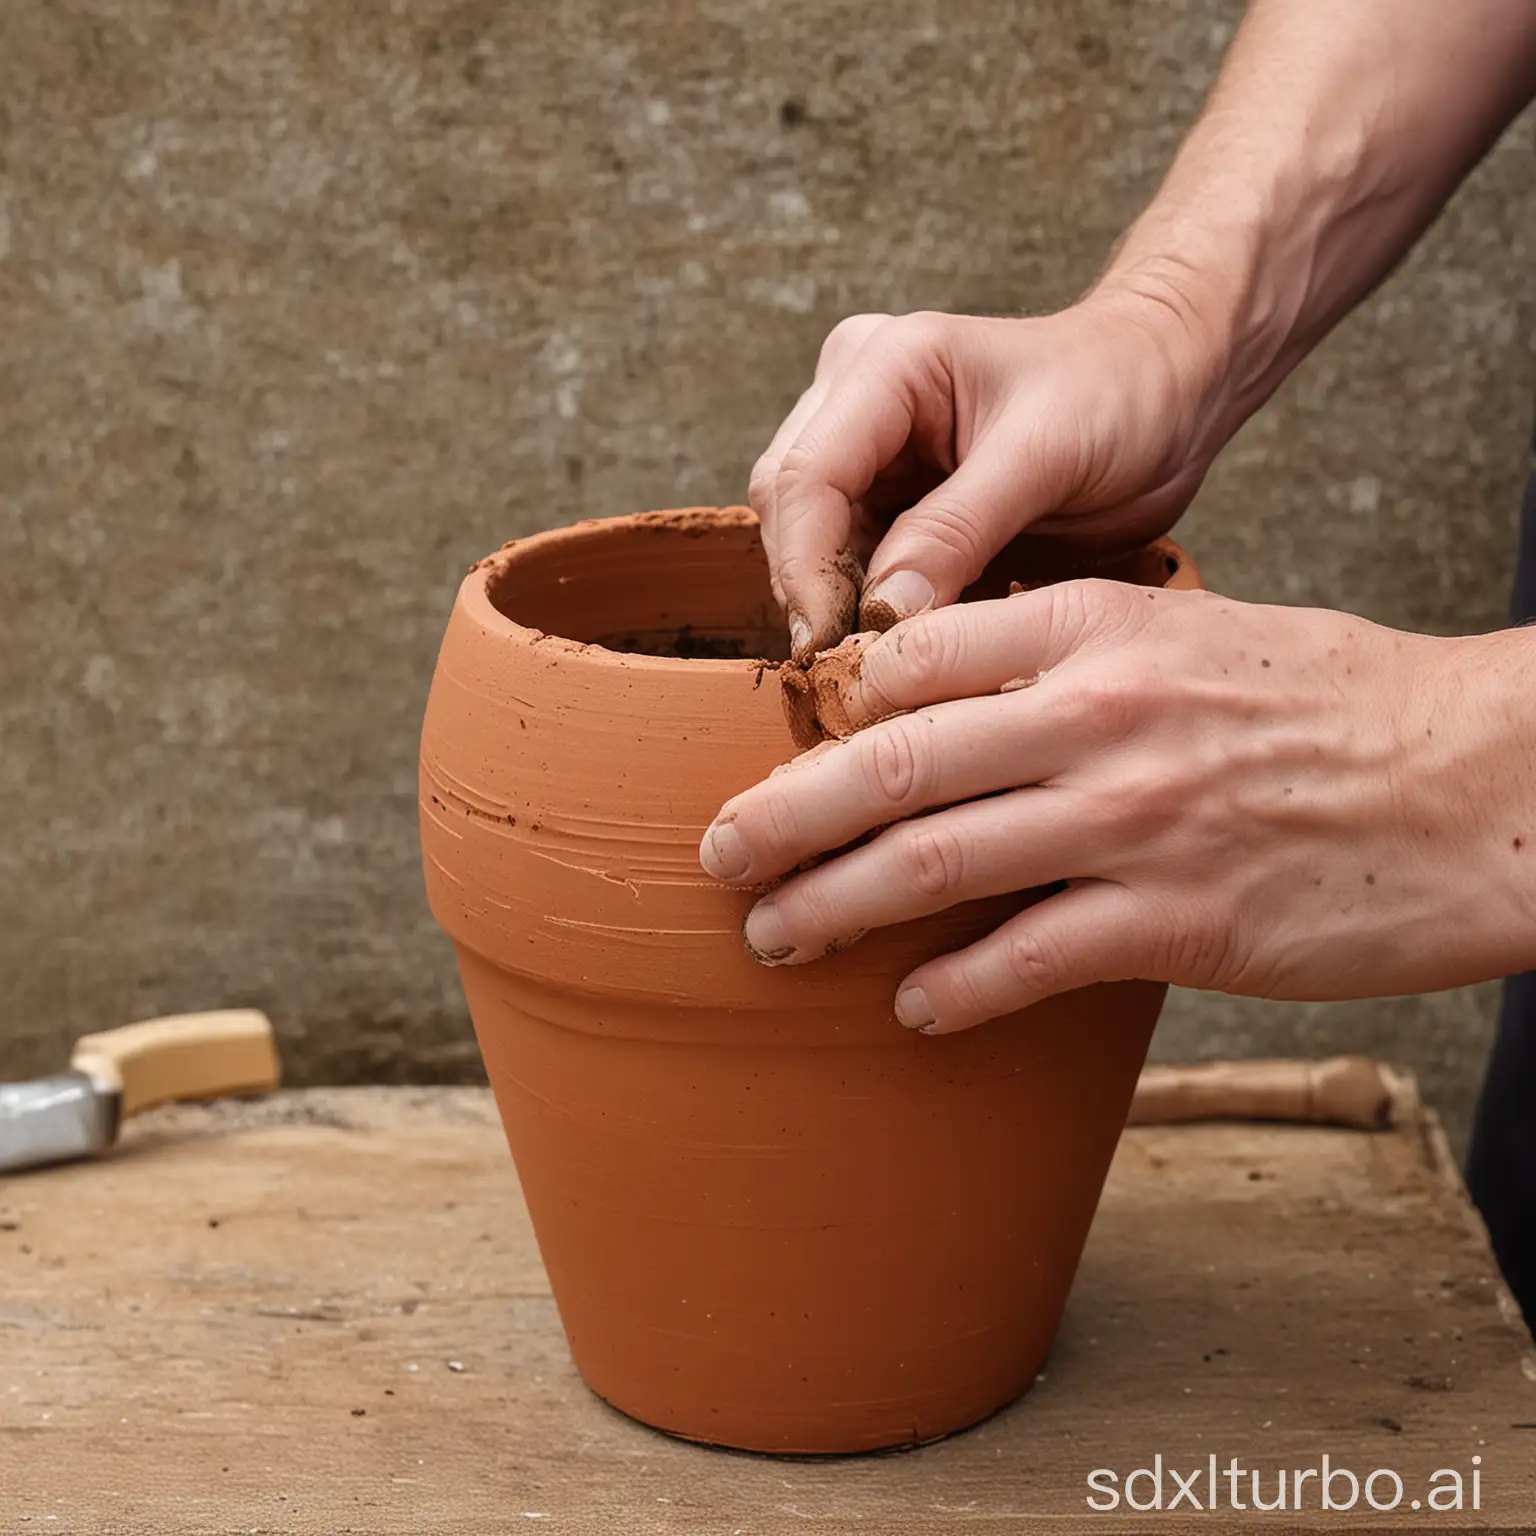 A picture of a hand shaping a flower pot